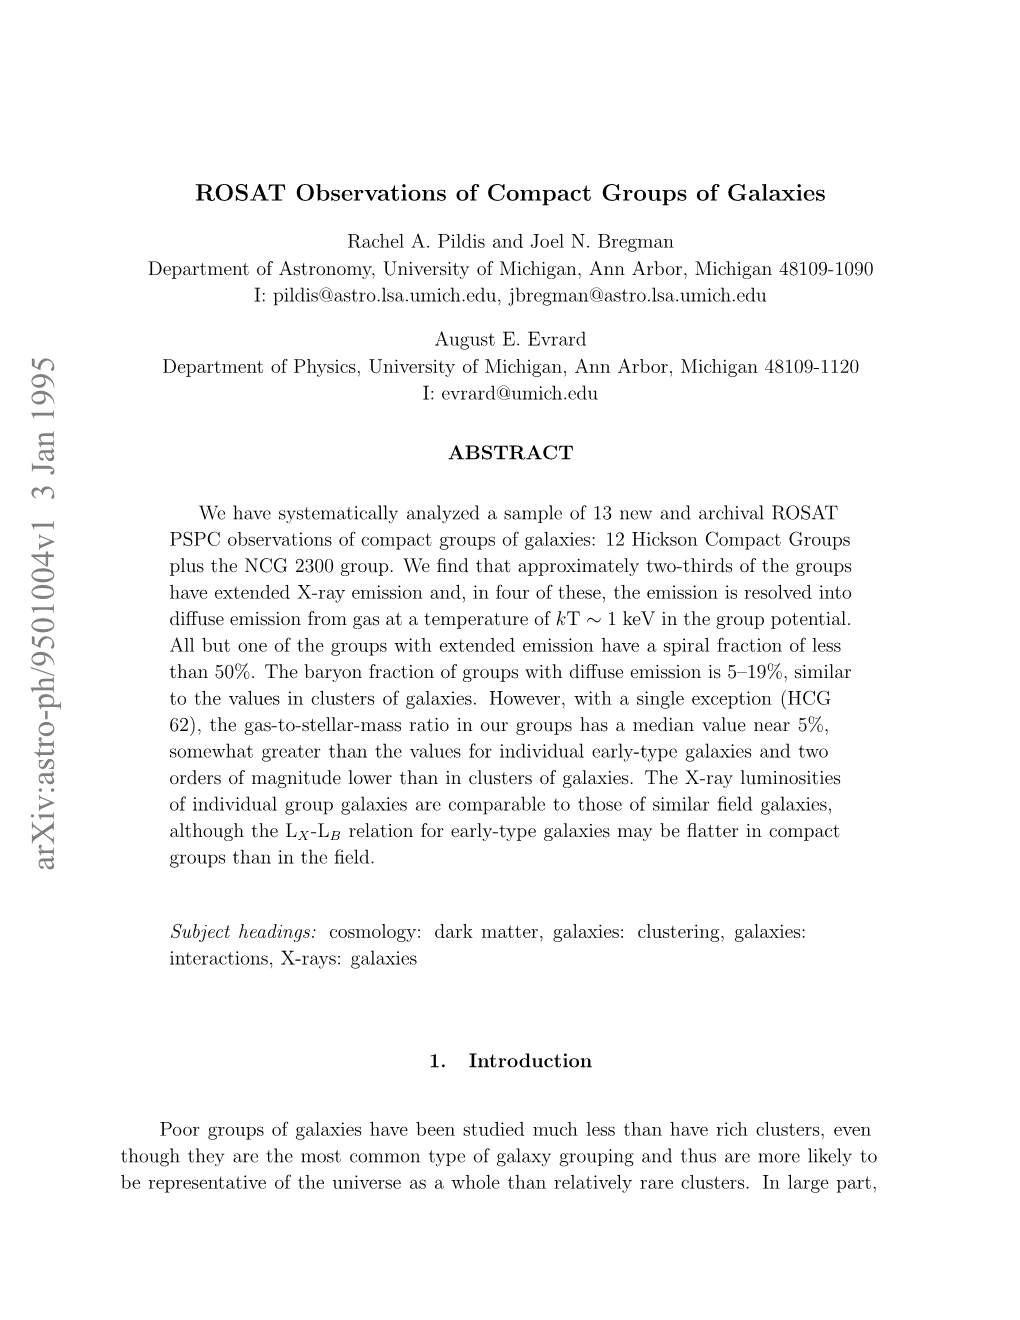 ROSAT Observations of Compact Groups of Galaxies